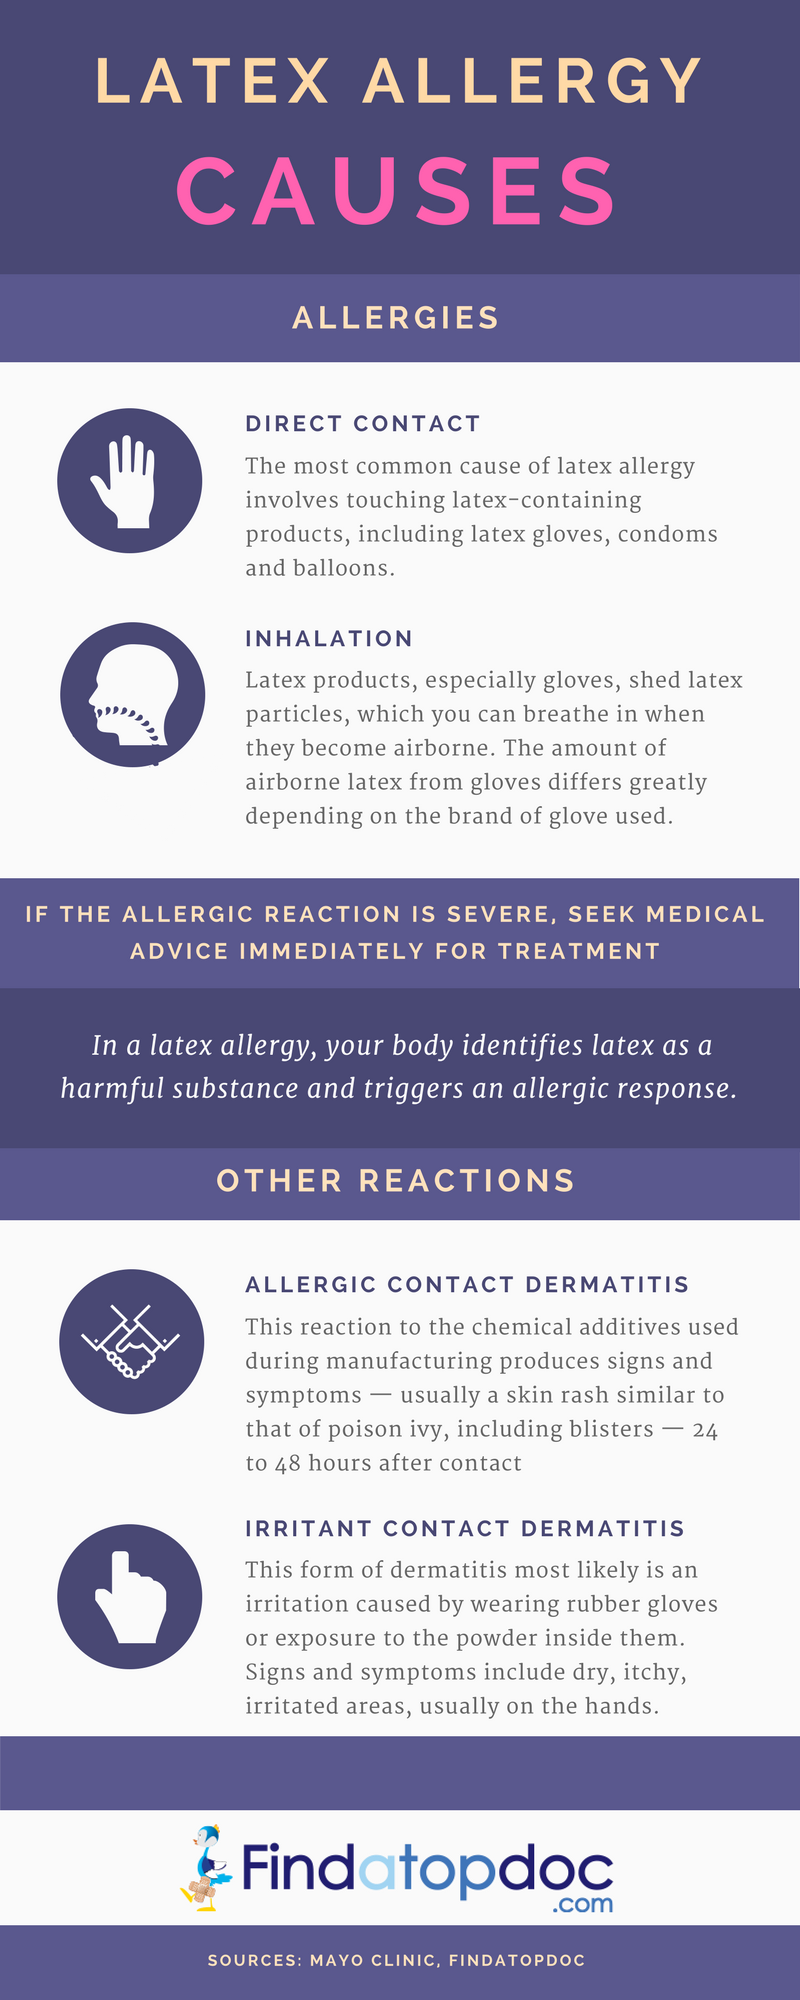 Latex Allergy: Symptoms, Causes, Treatment, and Diagnosis